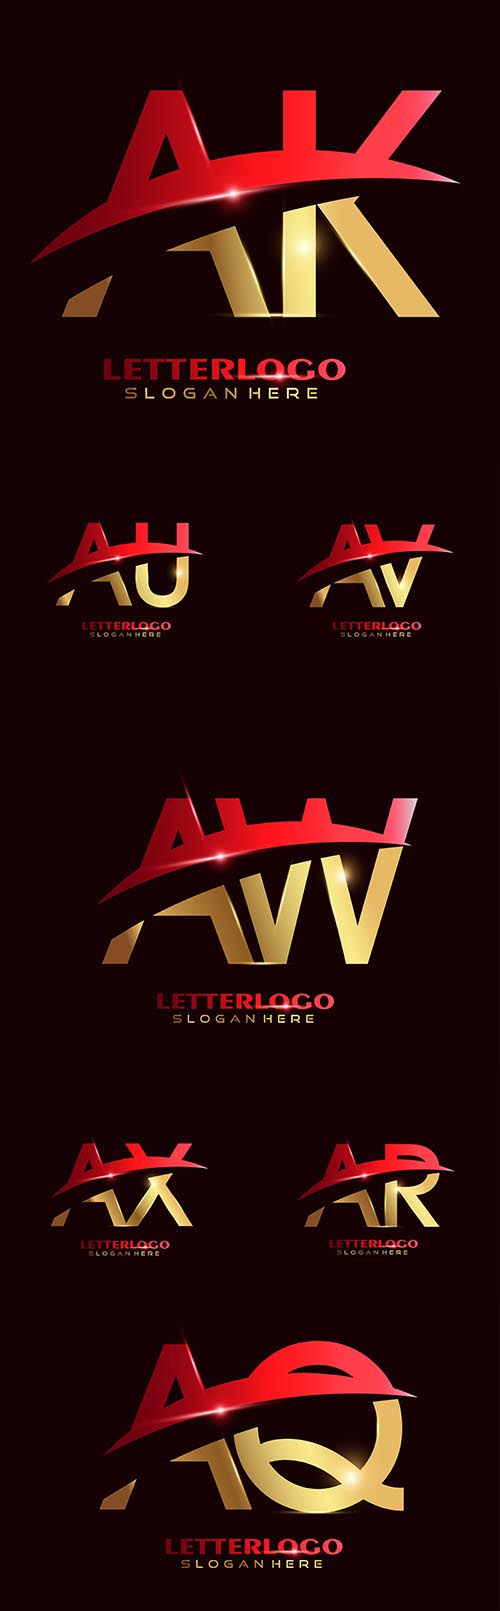 Initial letter and Brand name company logos design